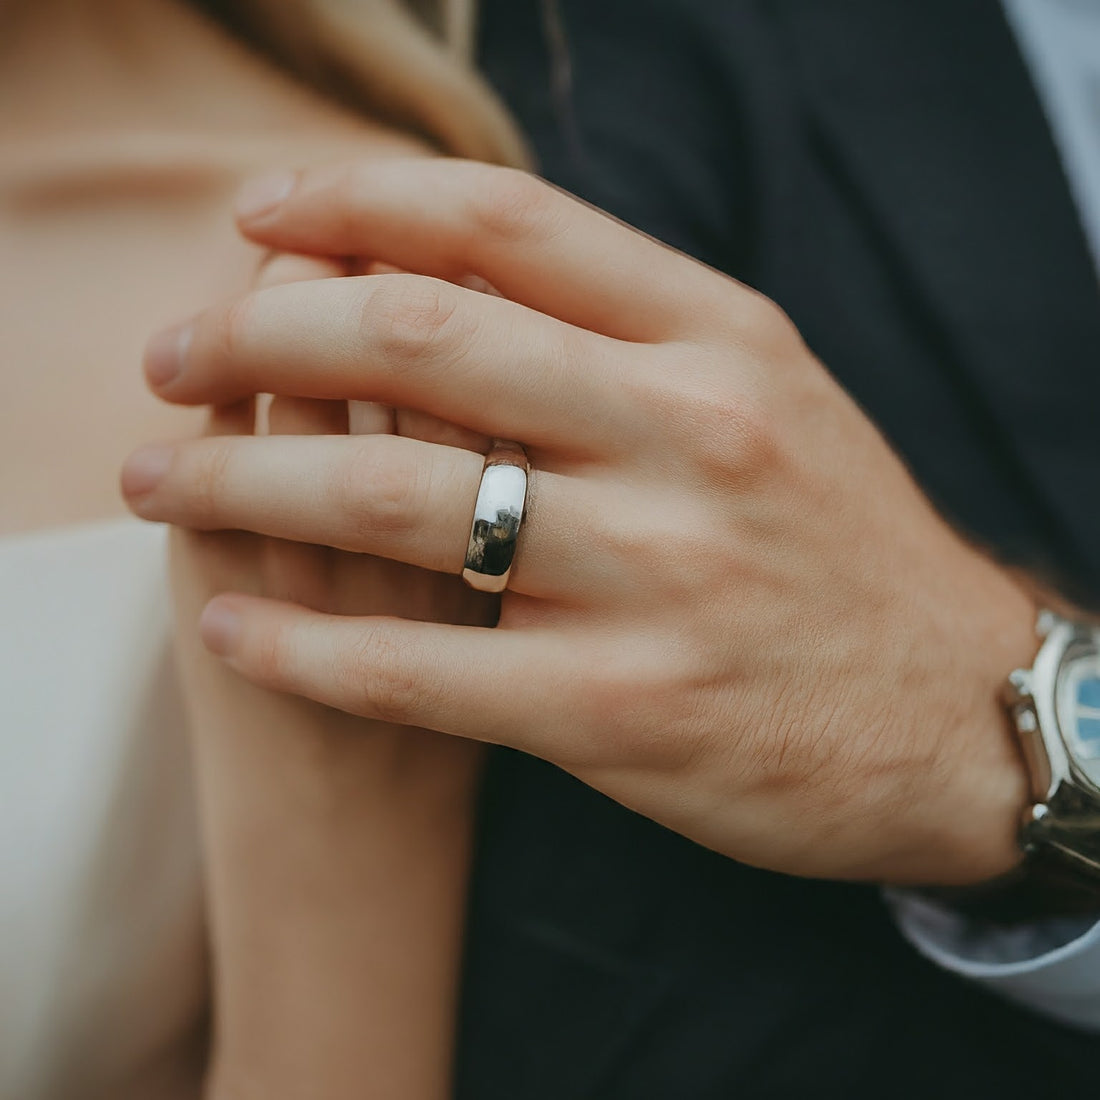 All You Need to Know About Men’s Wedding Bands